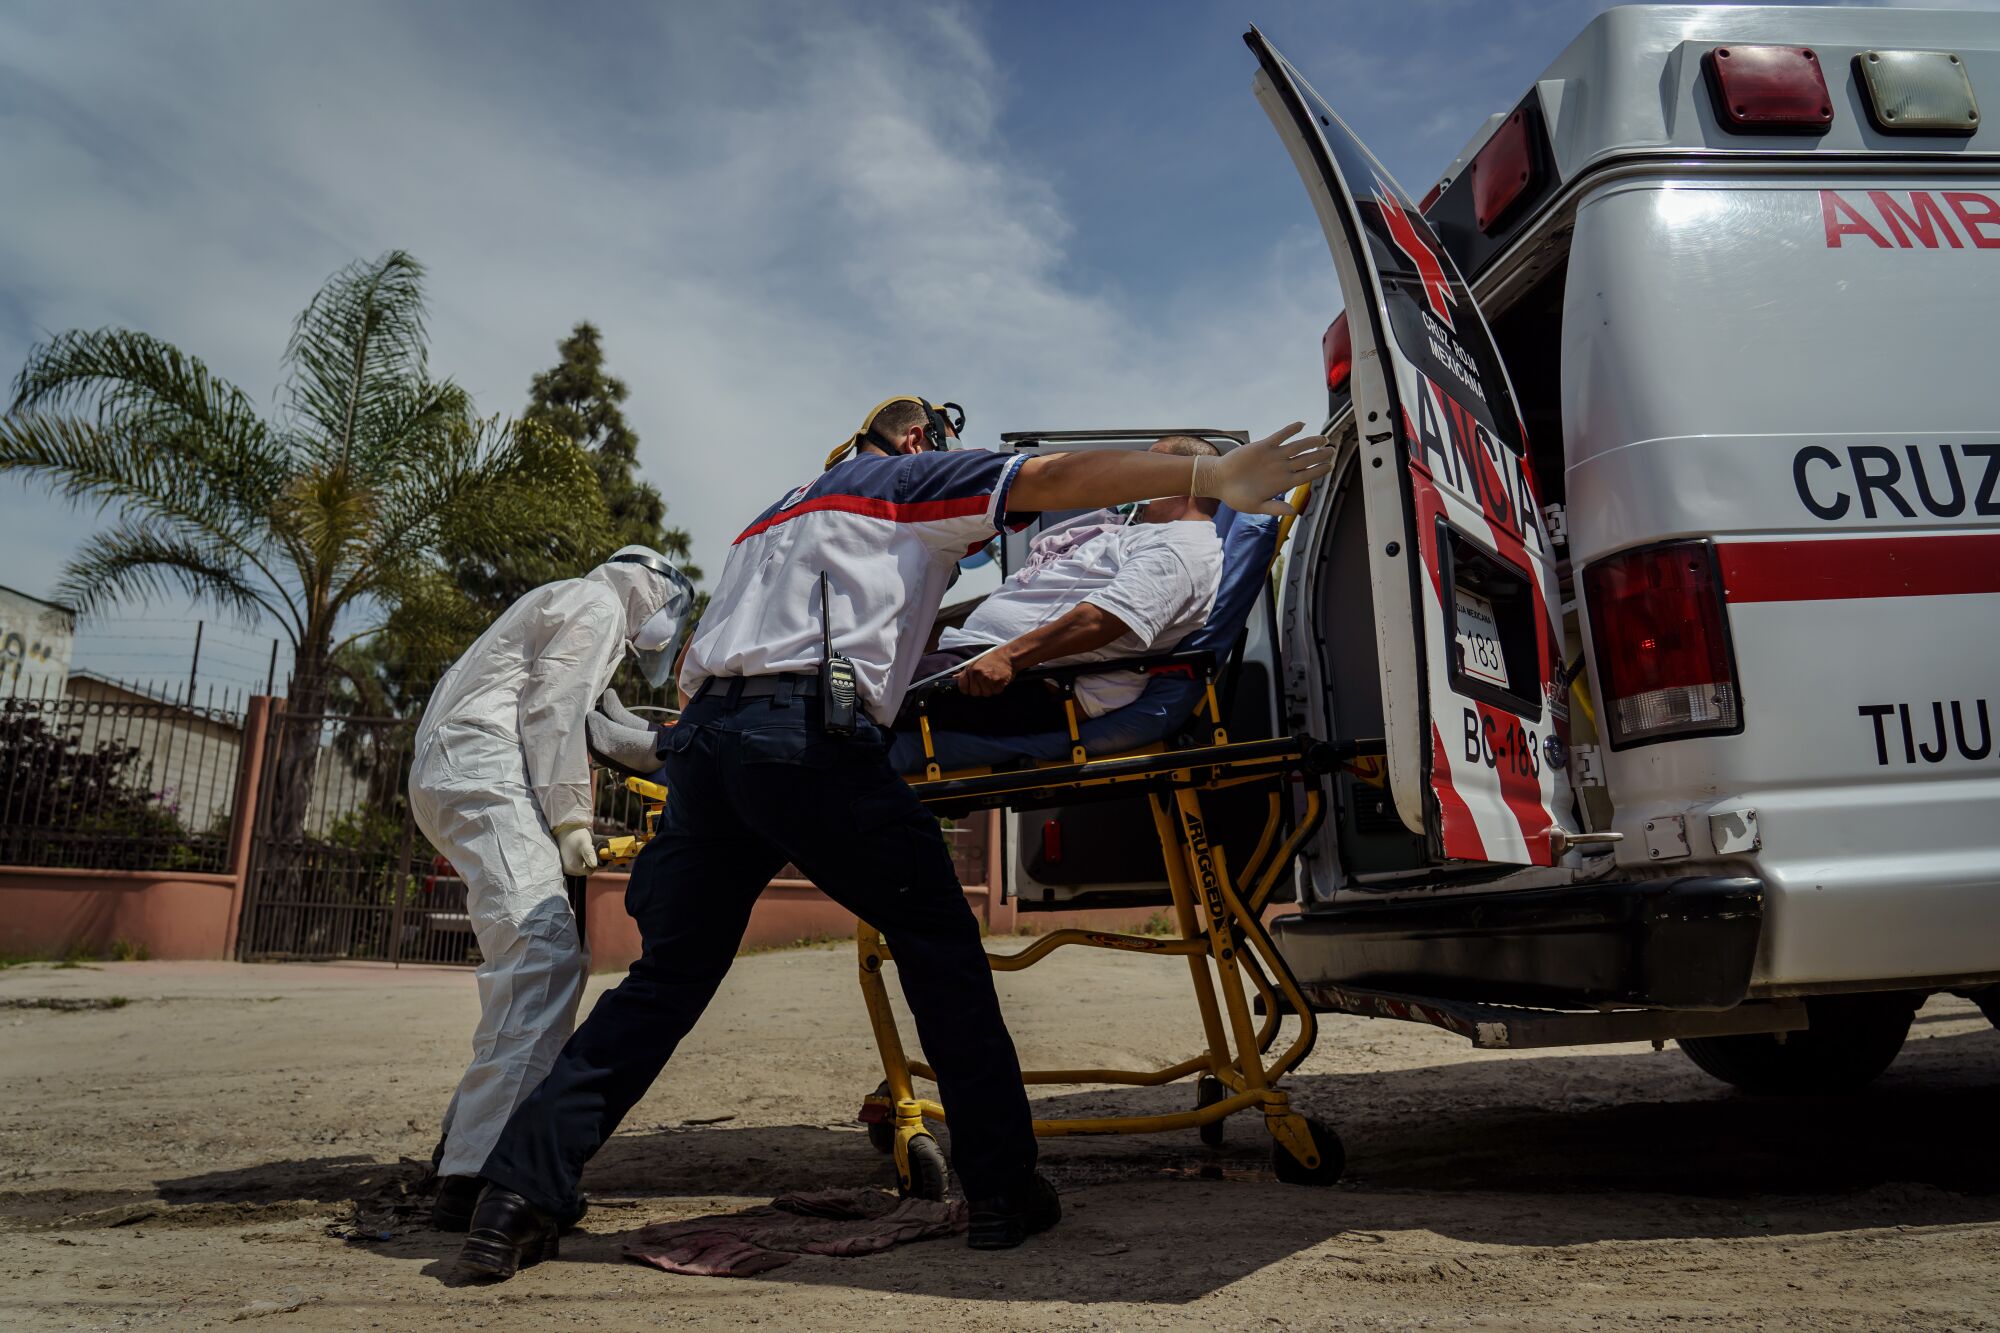 Sergio Garcia swings the ambulance door wide open as Red Cross paramedics help transport Eduardo Dionisio Molina, 41, who has symptoms related to COVID-19, to a nearby hospital from his home in the Ejido Matamoros neighborhood of Tijuana, Mexico, on April 29, 2020.